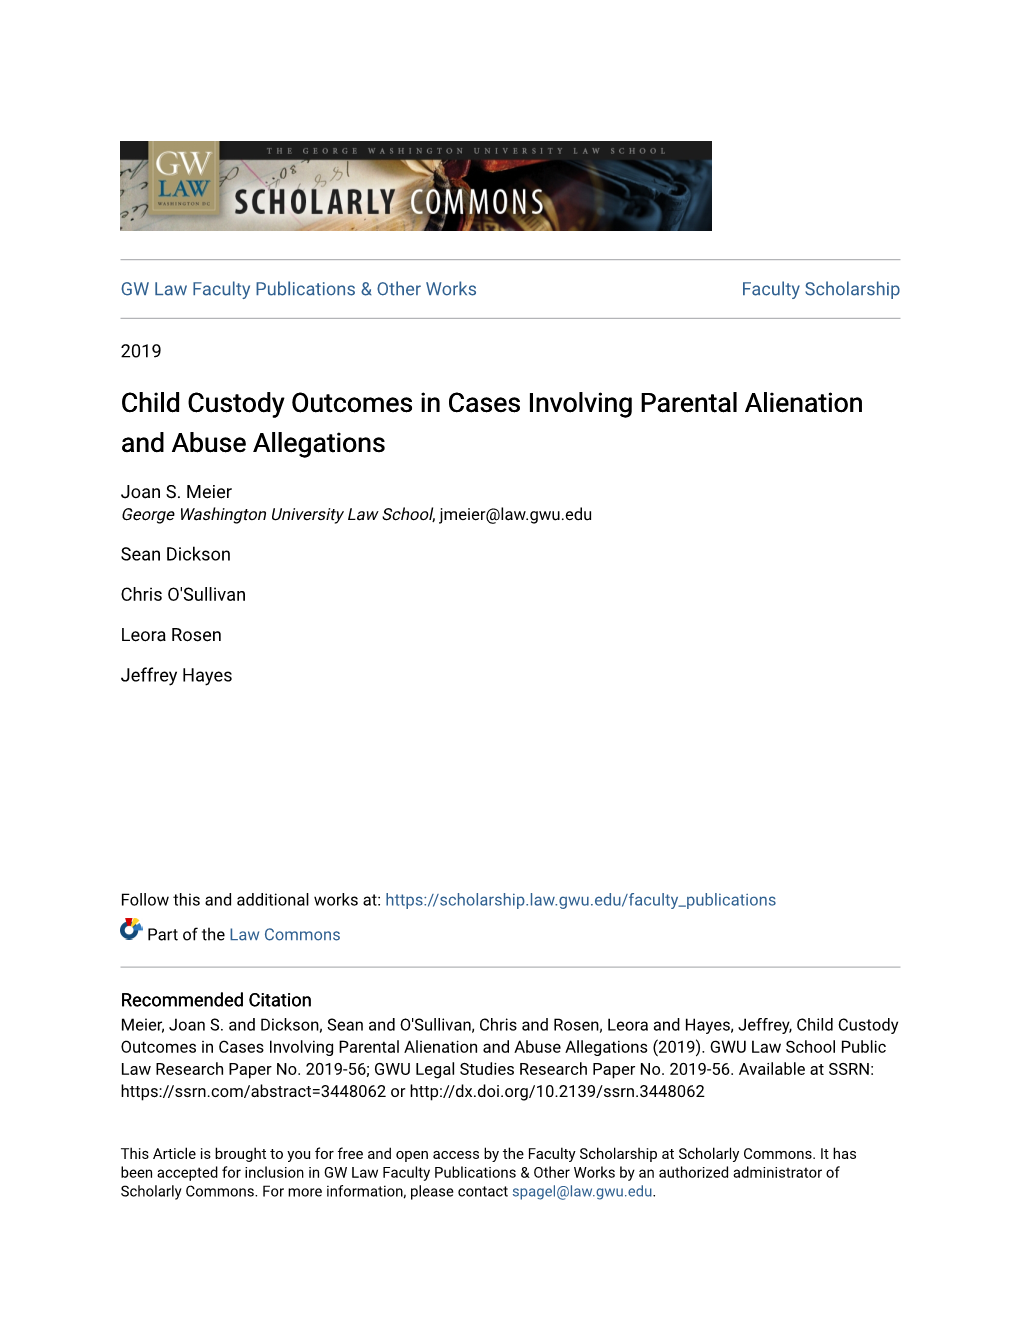 Child Custody Outcomes in Cases Involving Parental Alienation and Abuse Allegations